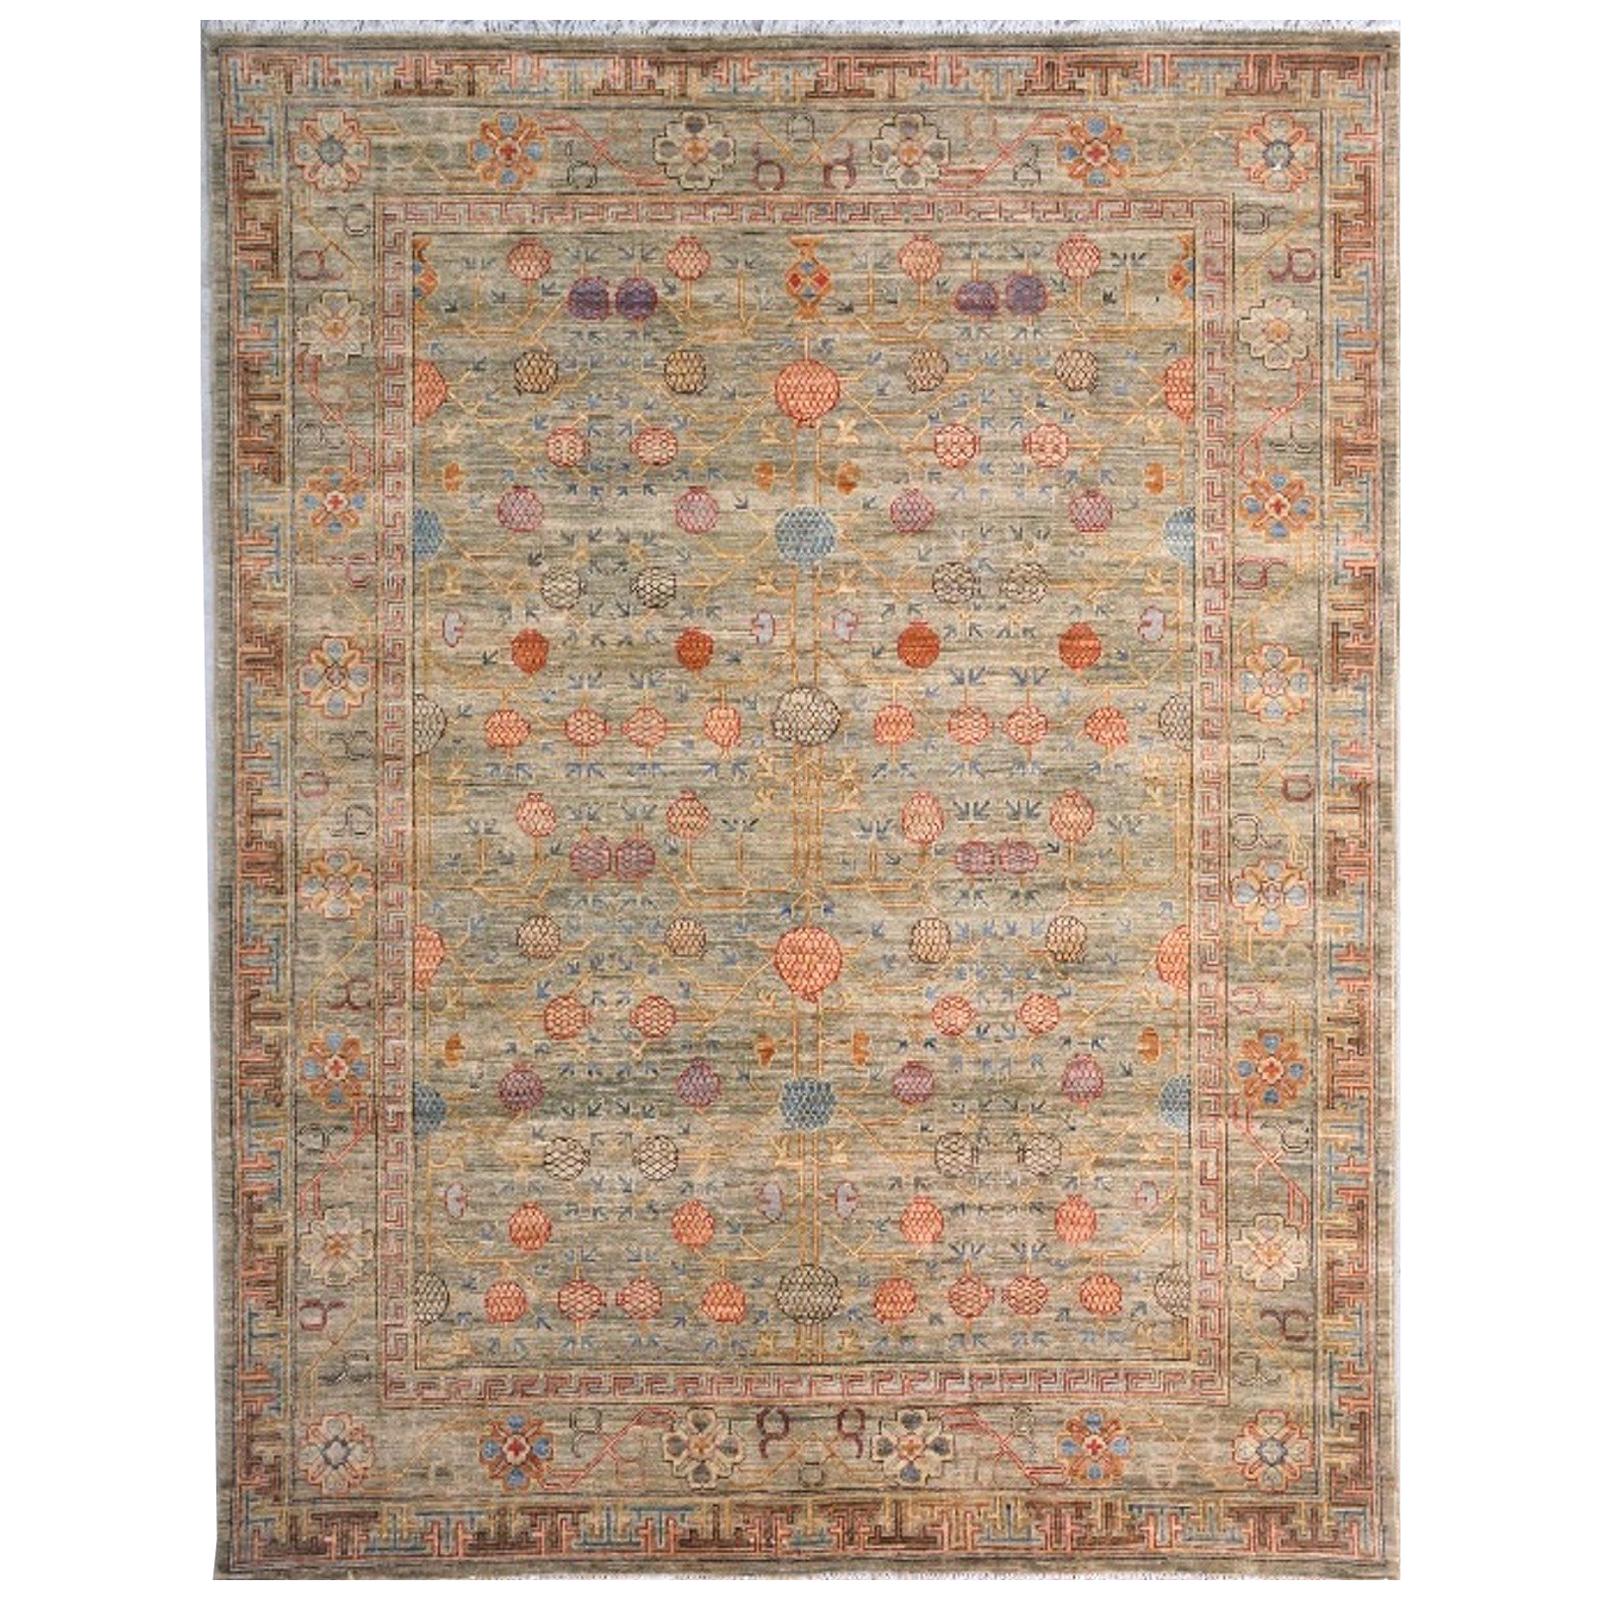 Khotan Style Rug Hand Knotted Pomegranate Tree Contemporary Wool Area Carpet